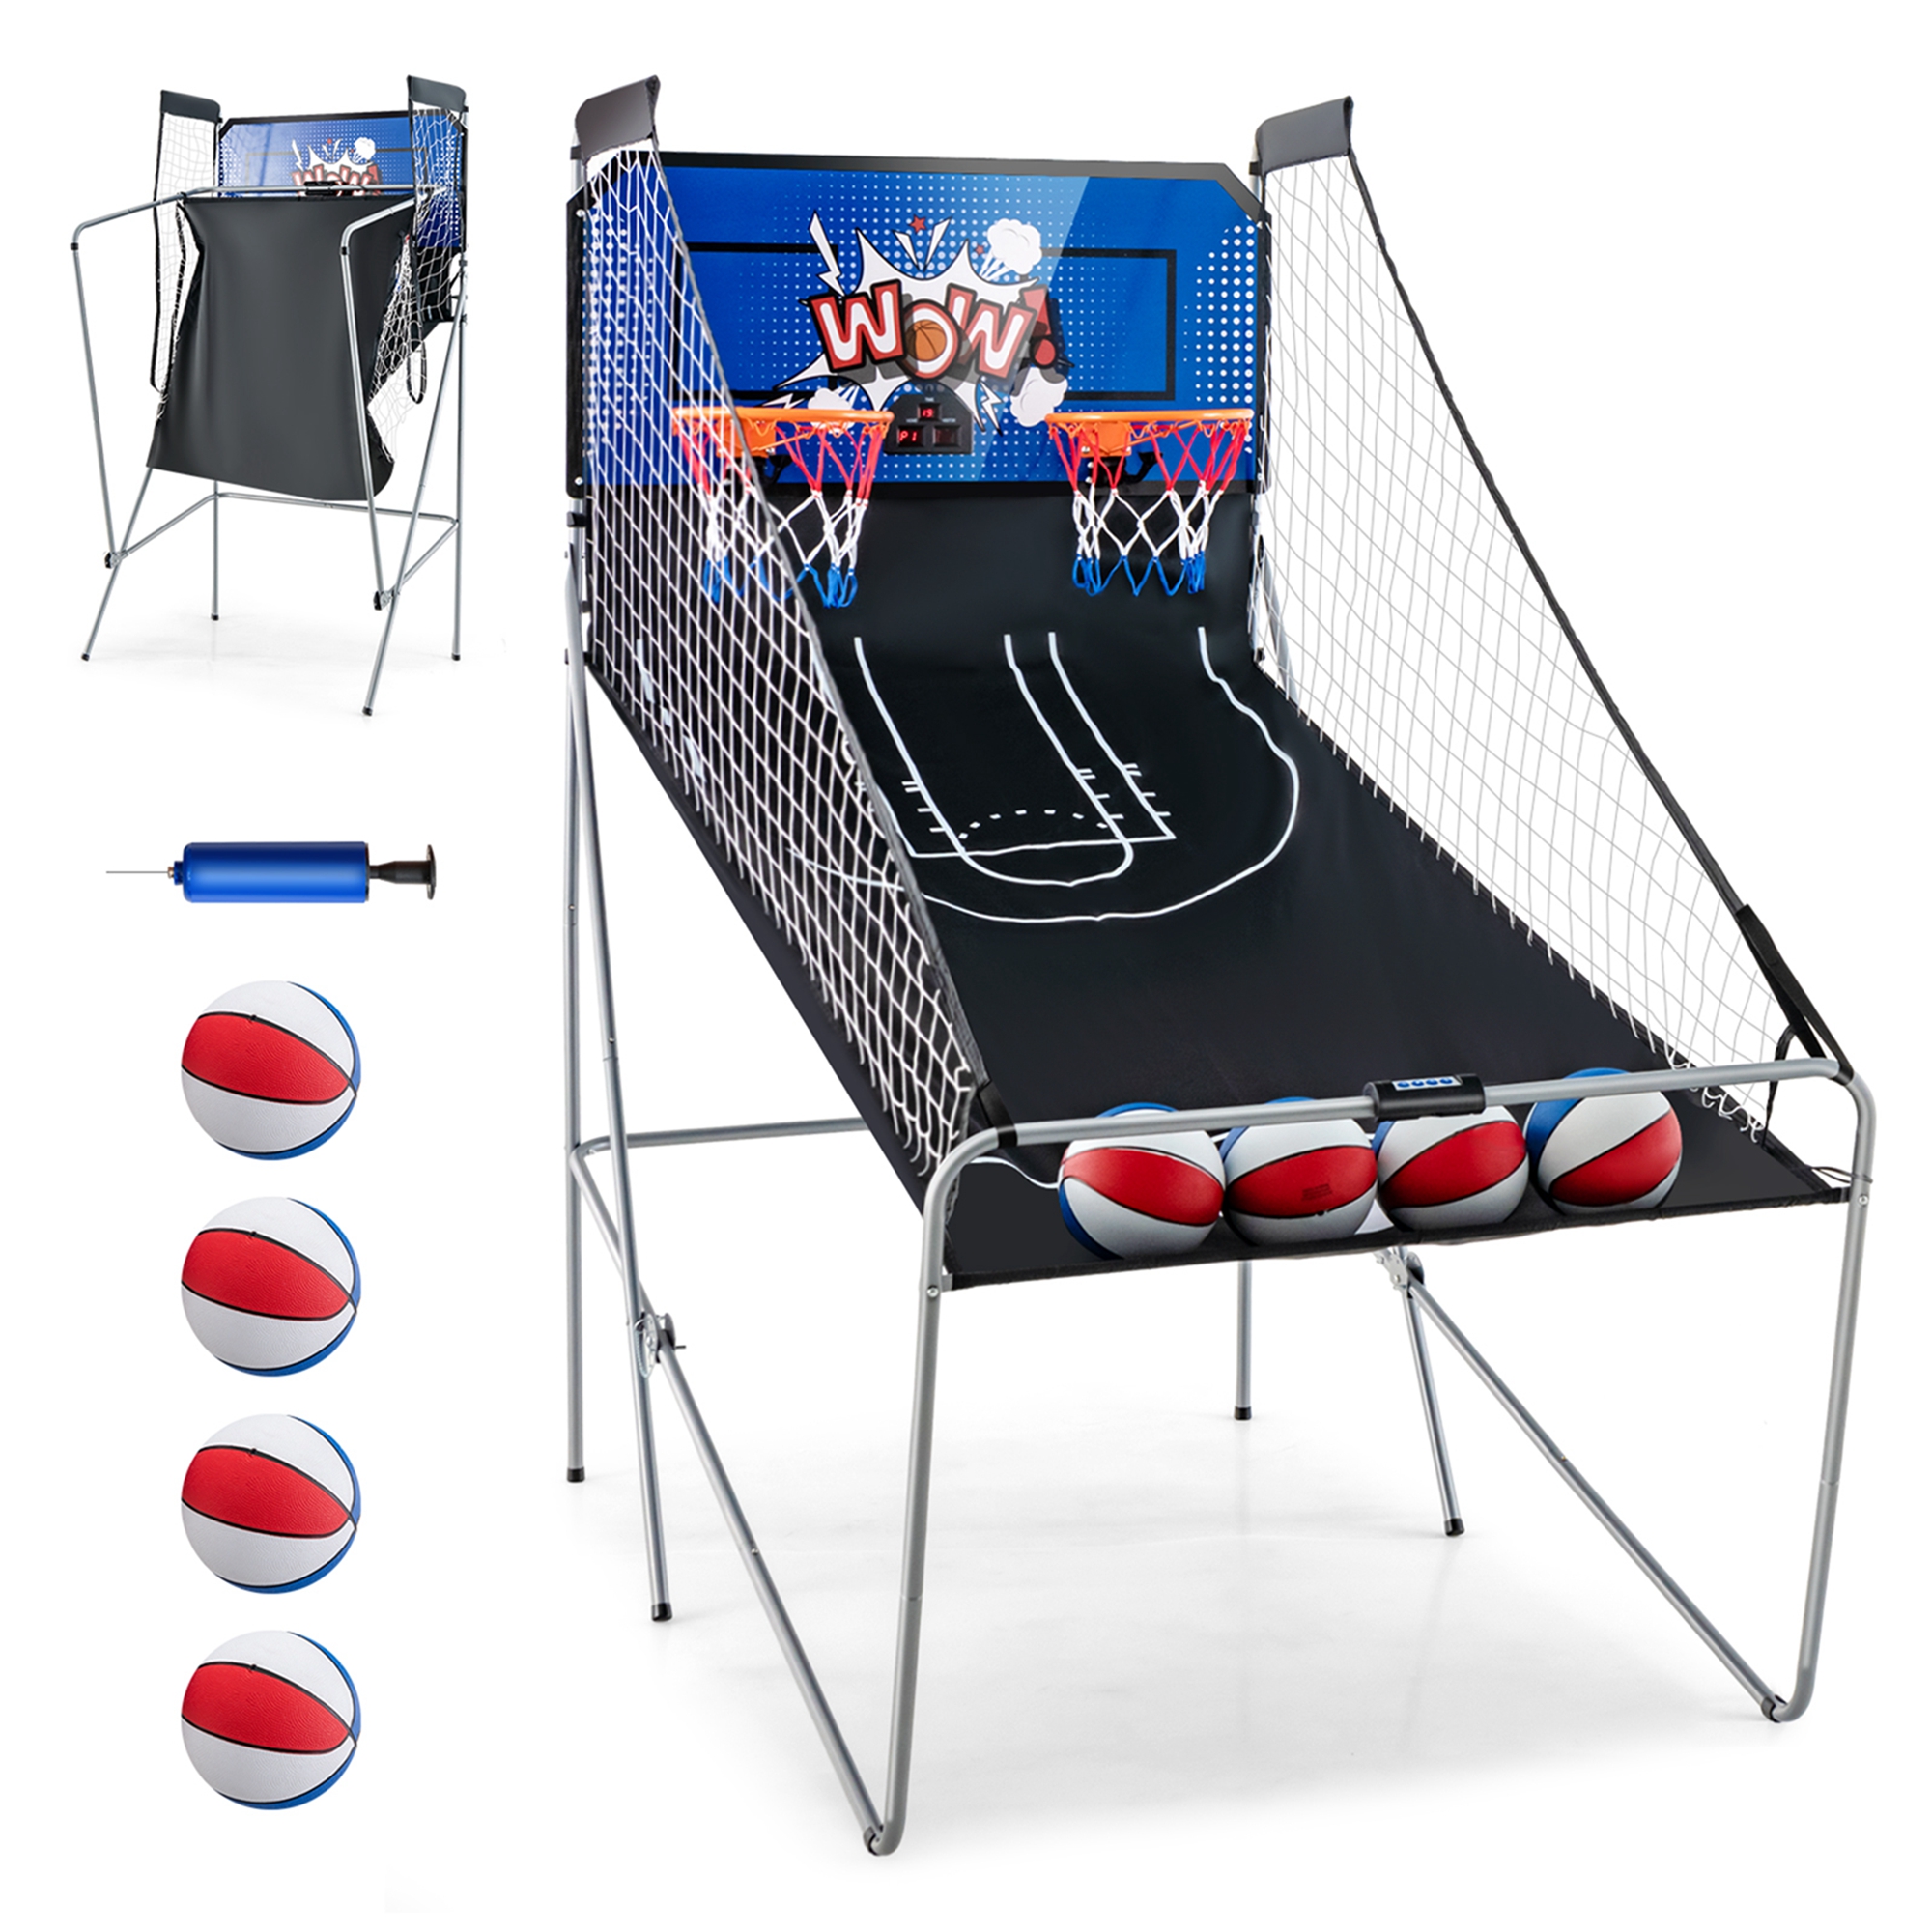 Costway Dual Shot Basketball Arcade Game with 8 Game Modes Electronic Scoring Blue